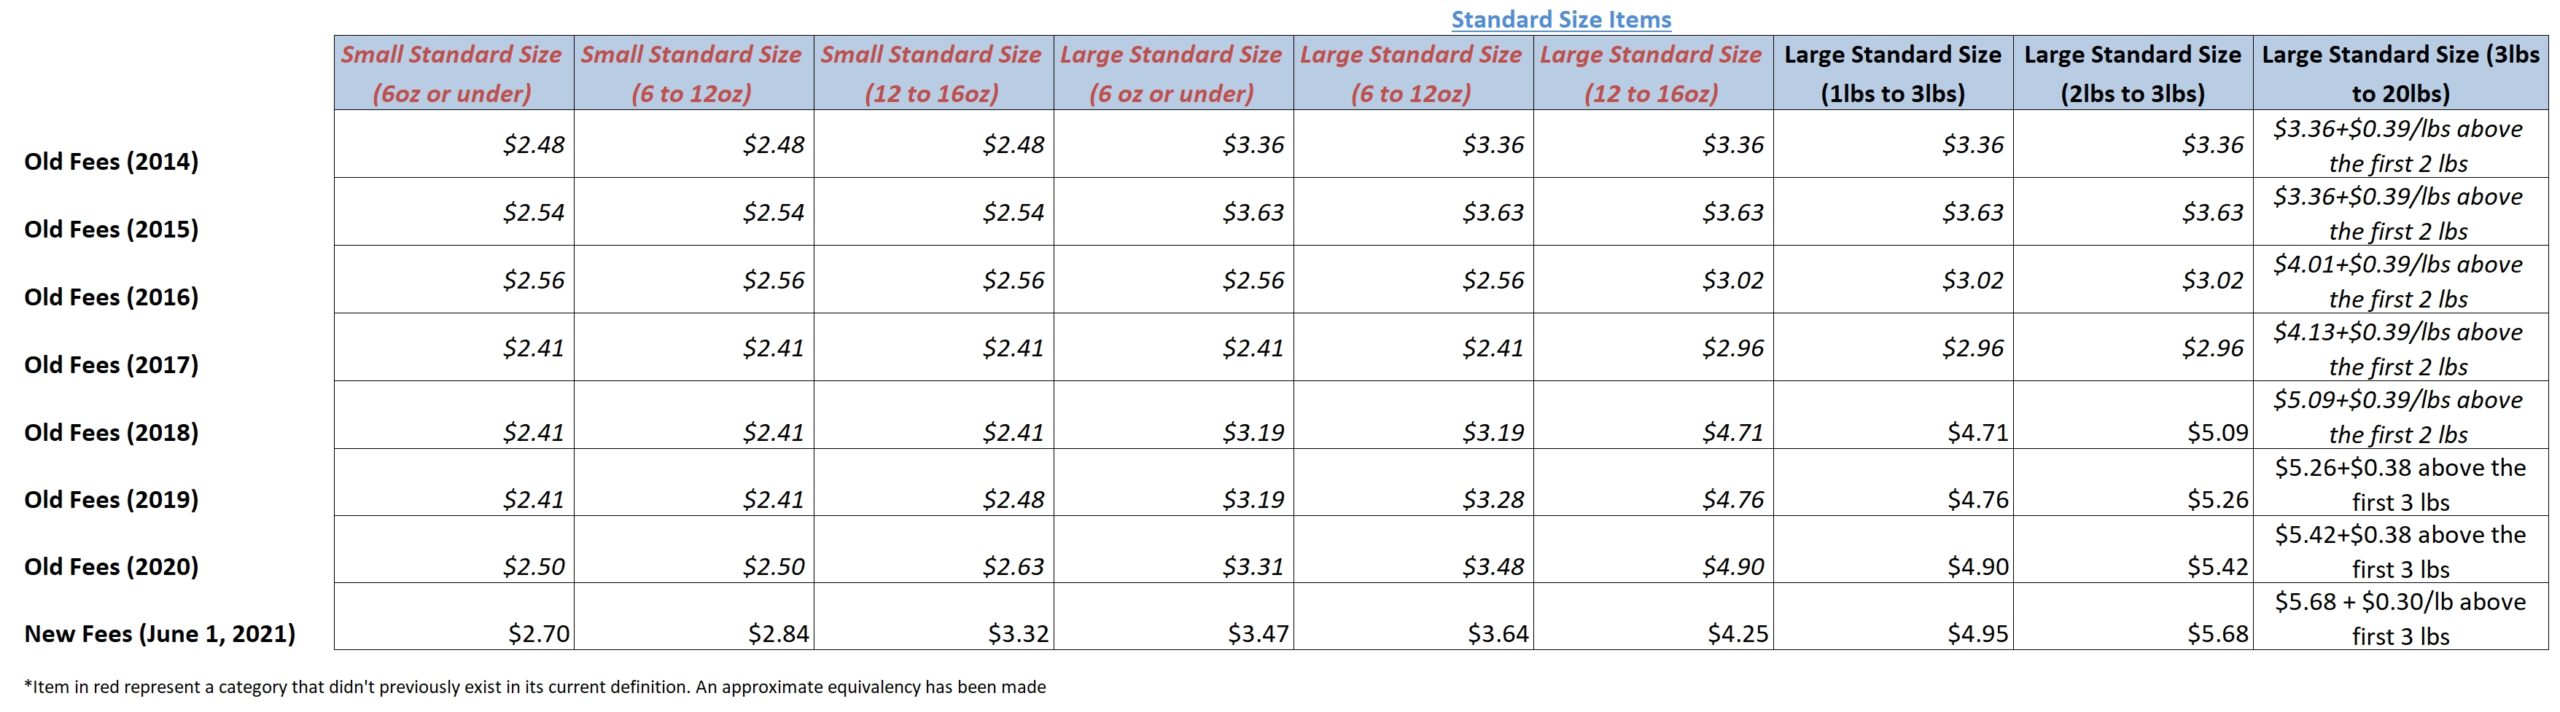 amazon historical fee increases standard size items 2014 to 2021